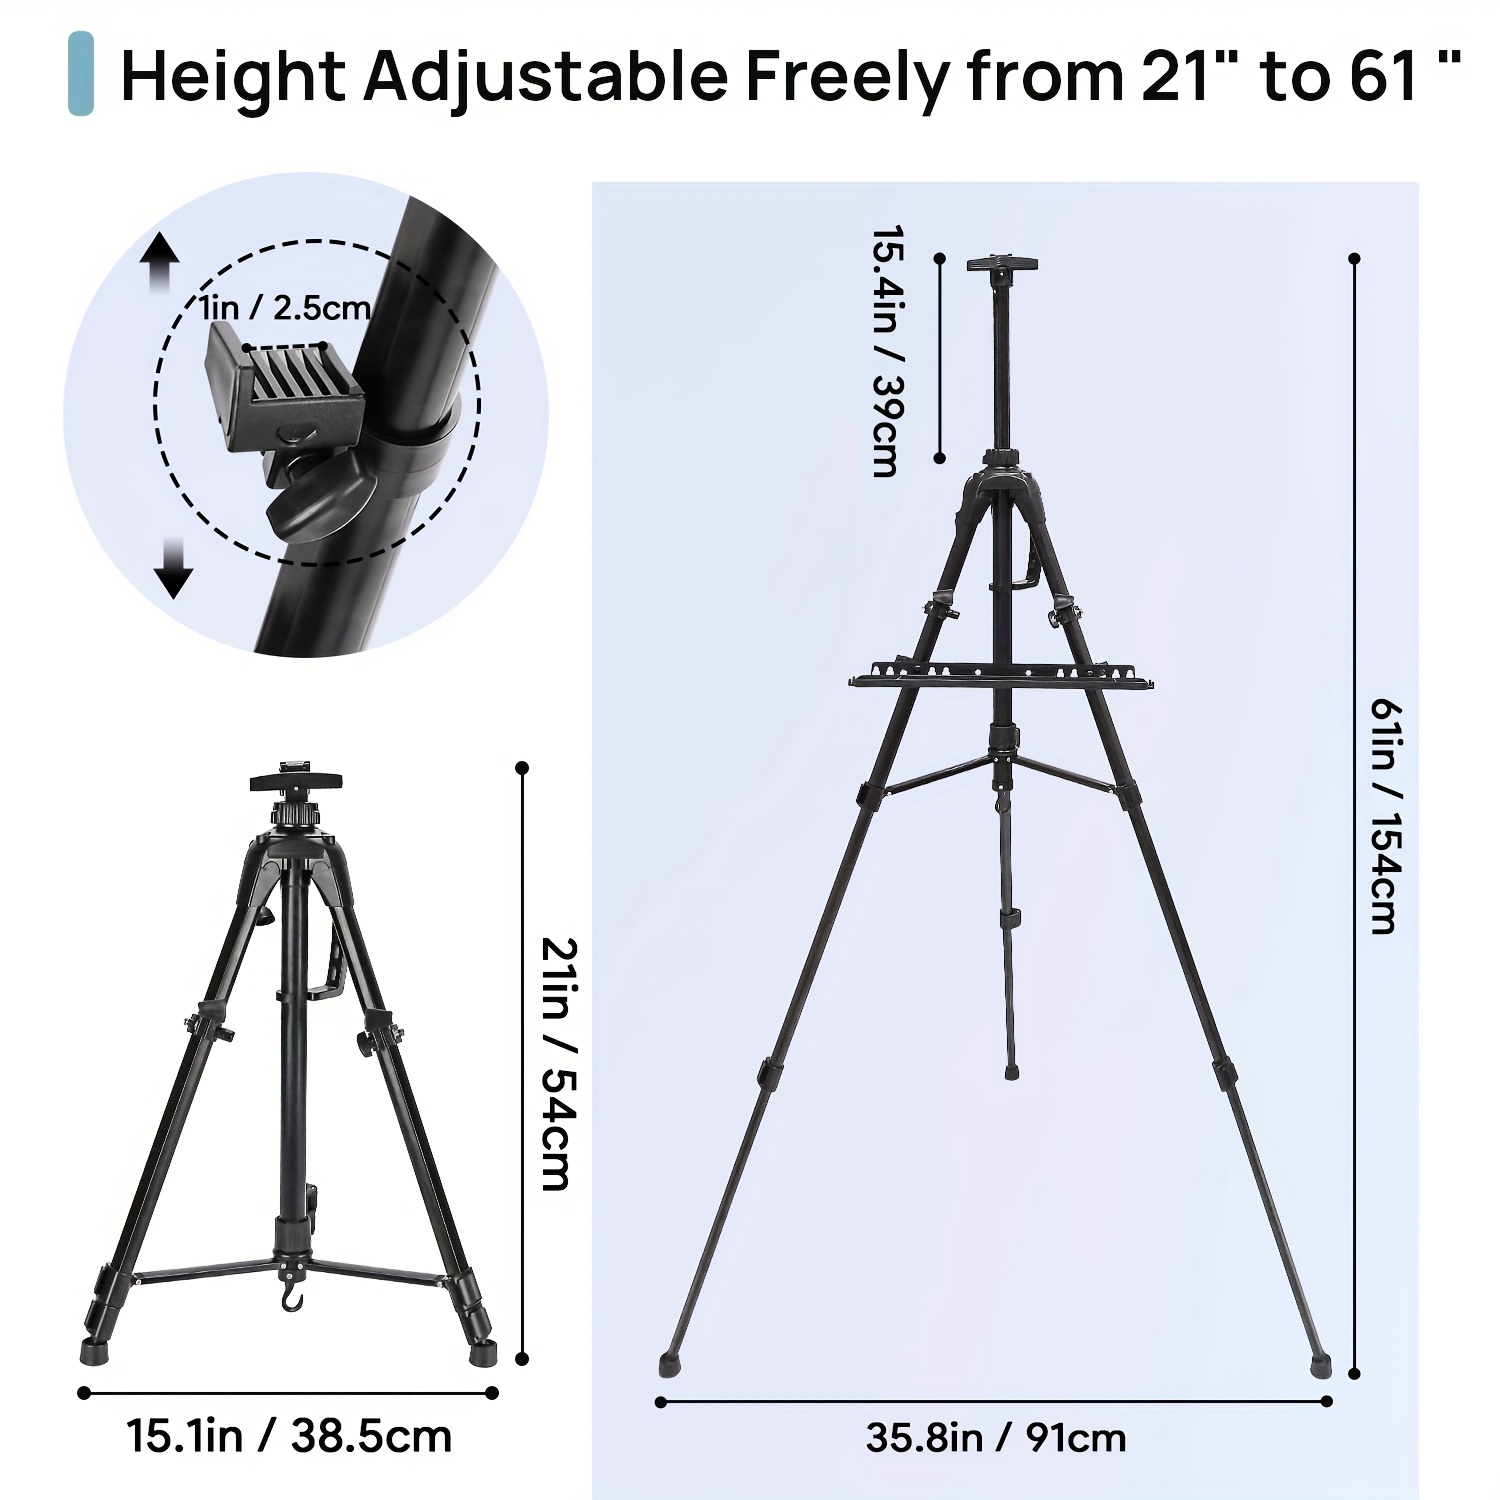 Portable Artist Easel Stand - Adjustable Height Painting Easel with Bag -  Table Top Art Drawing Easels for Painting Canvas